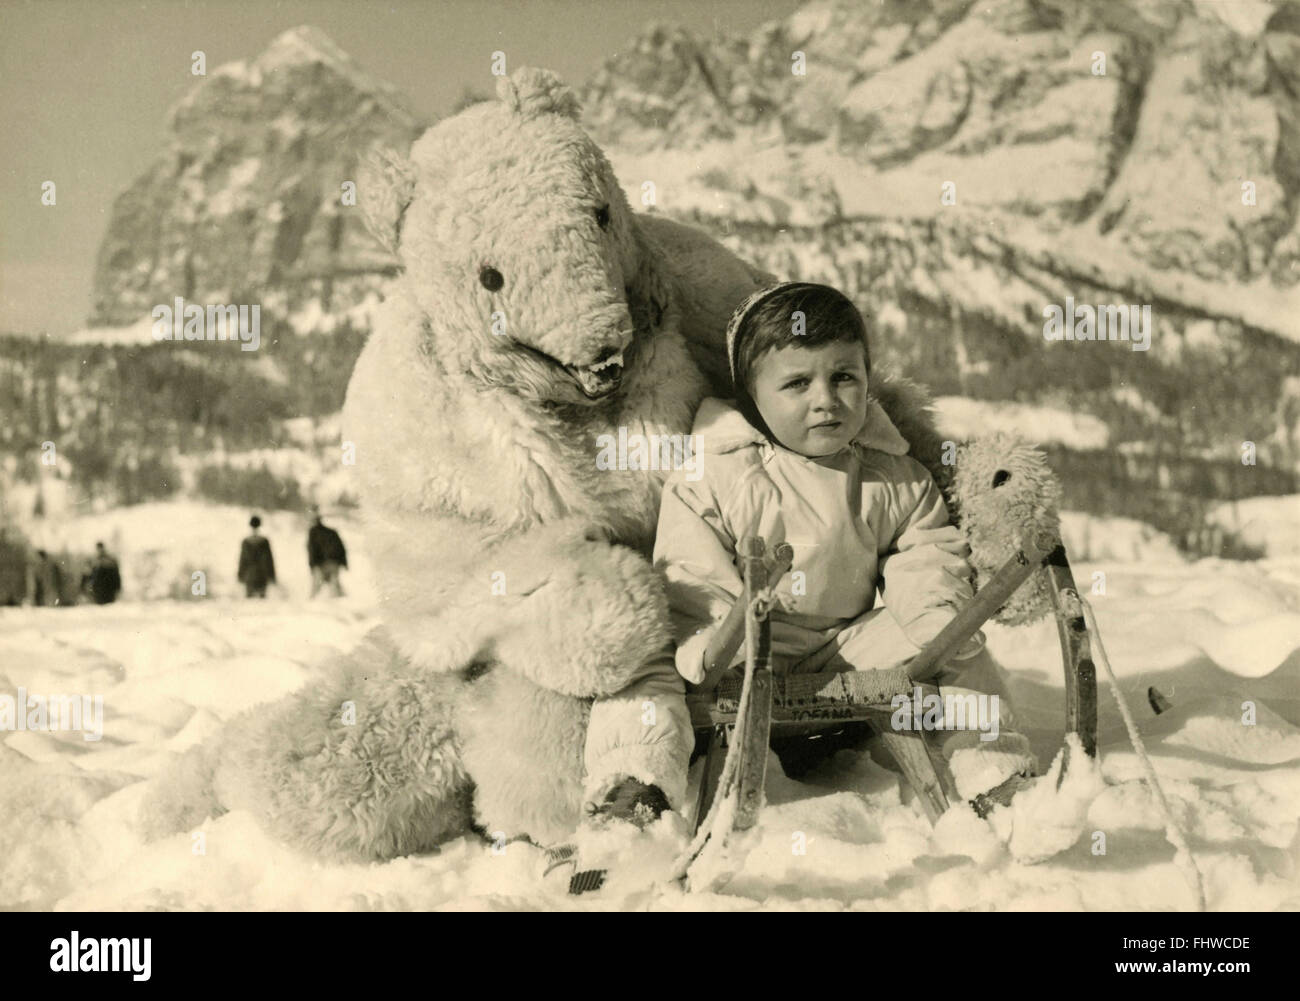 A child with a sled on the snow and a man disguised as a bear, Cortina, Italy Stock Photo